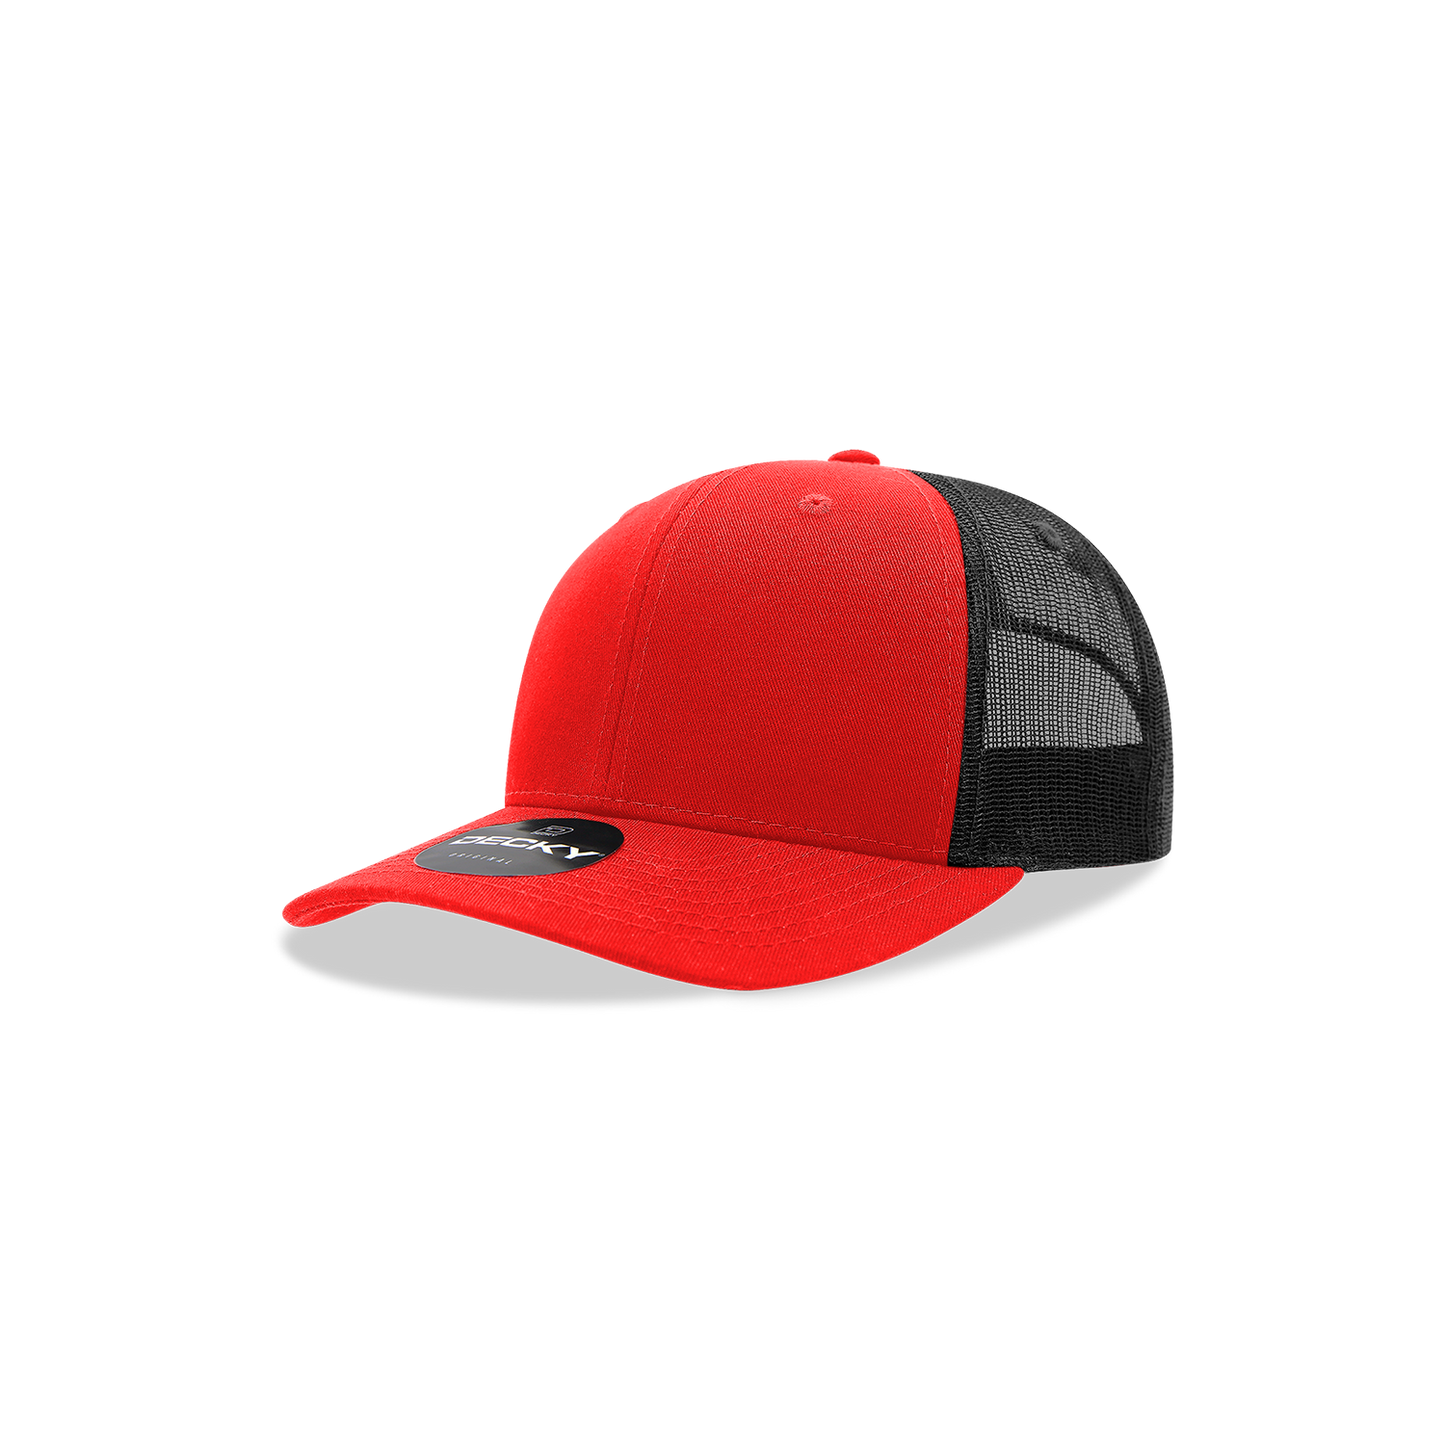 Kids, Youth Classic Trucker, Snapback Hat - Decky 5019: Red